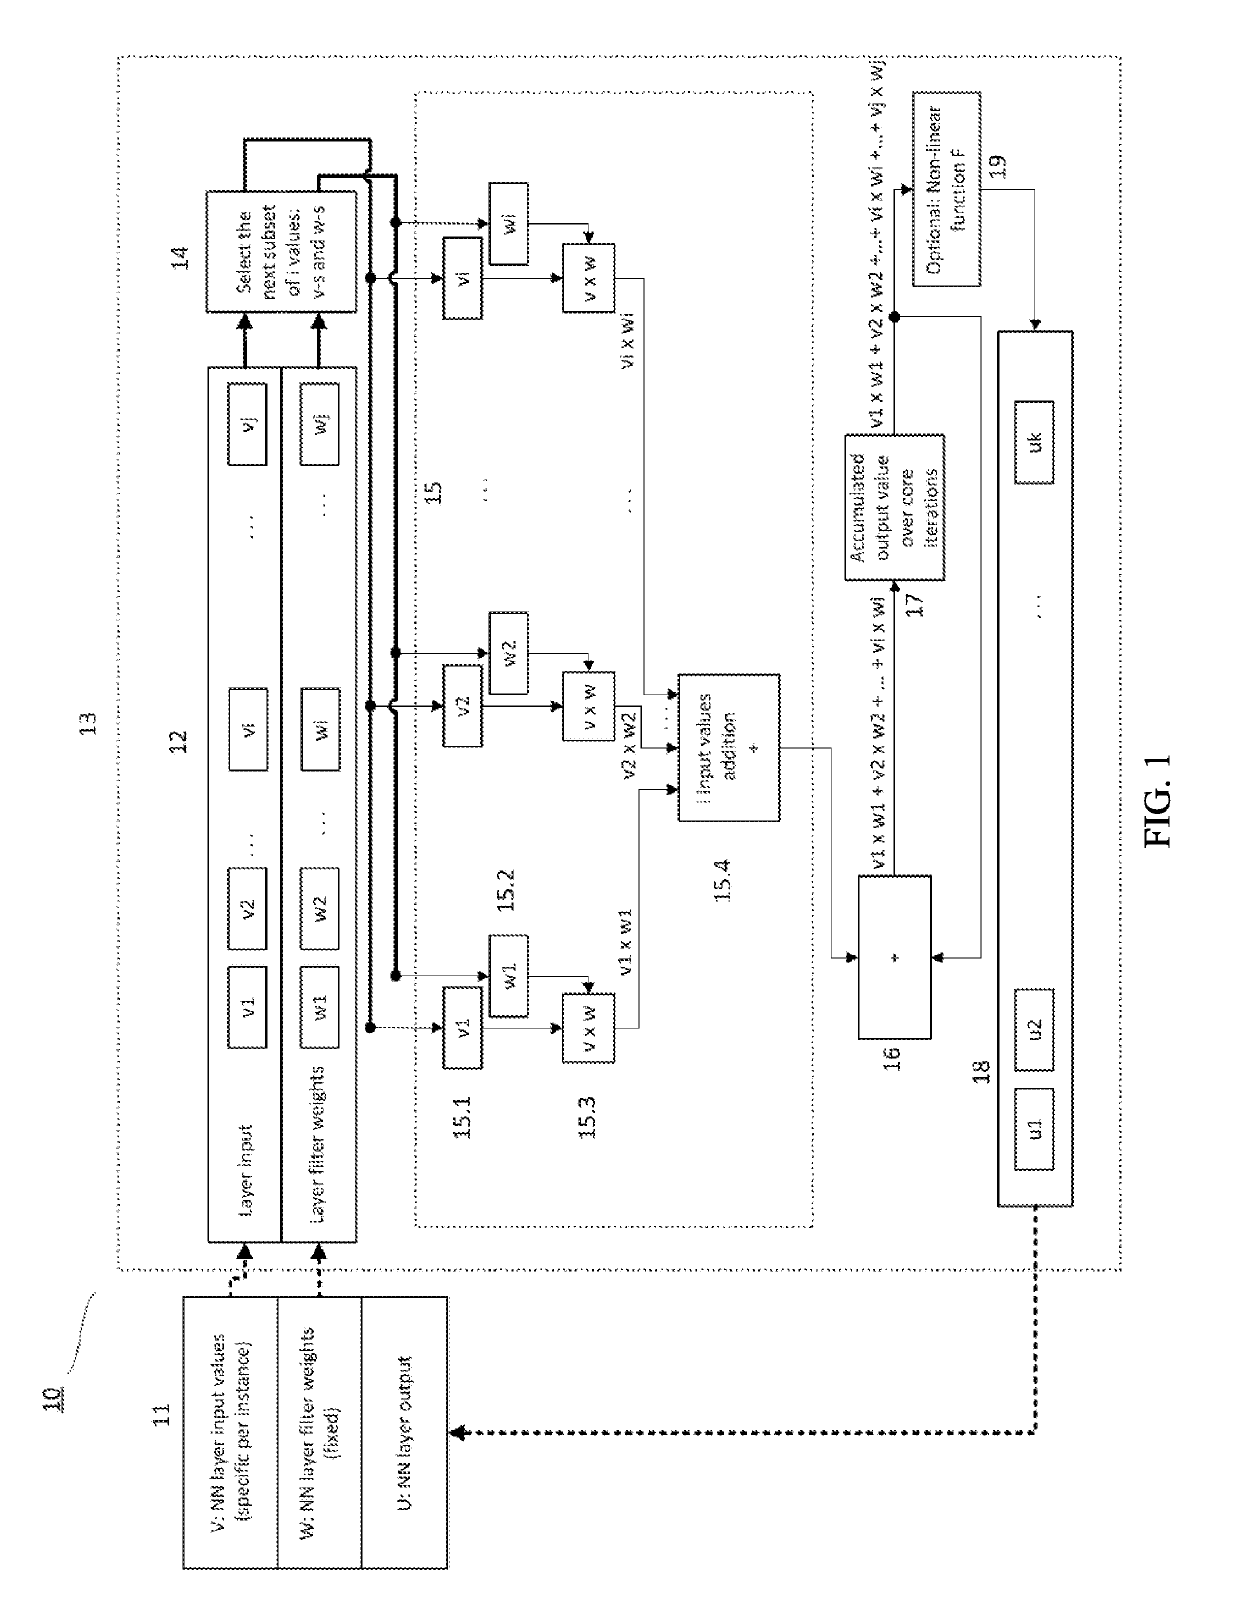 Low-power hardware acceleration method and system for convolution neural network computation